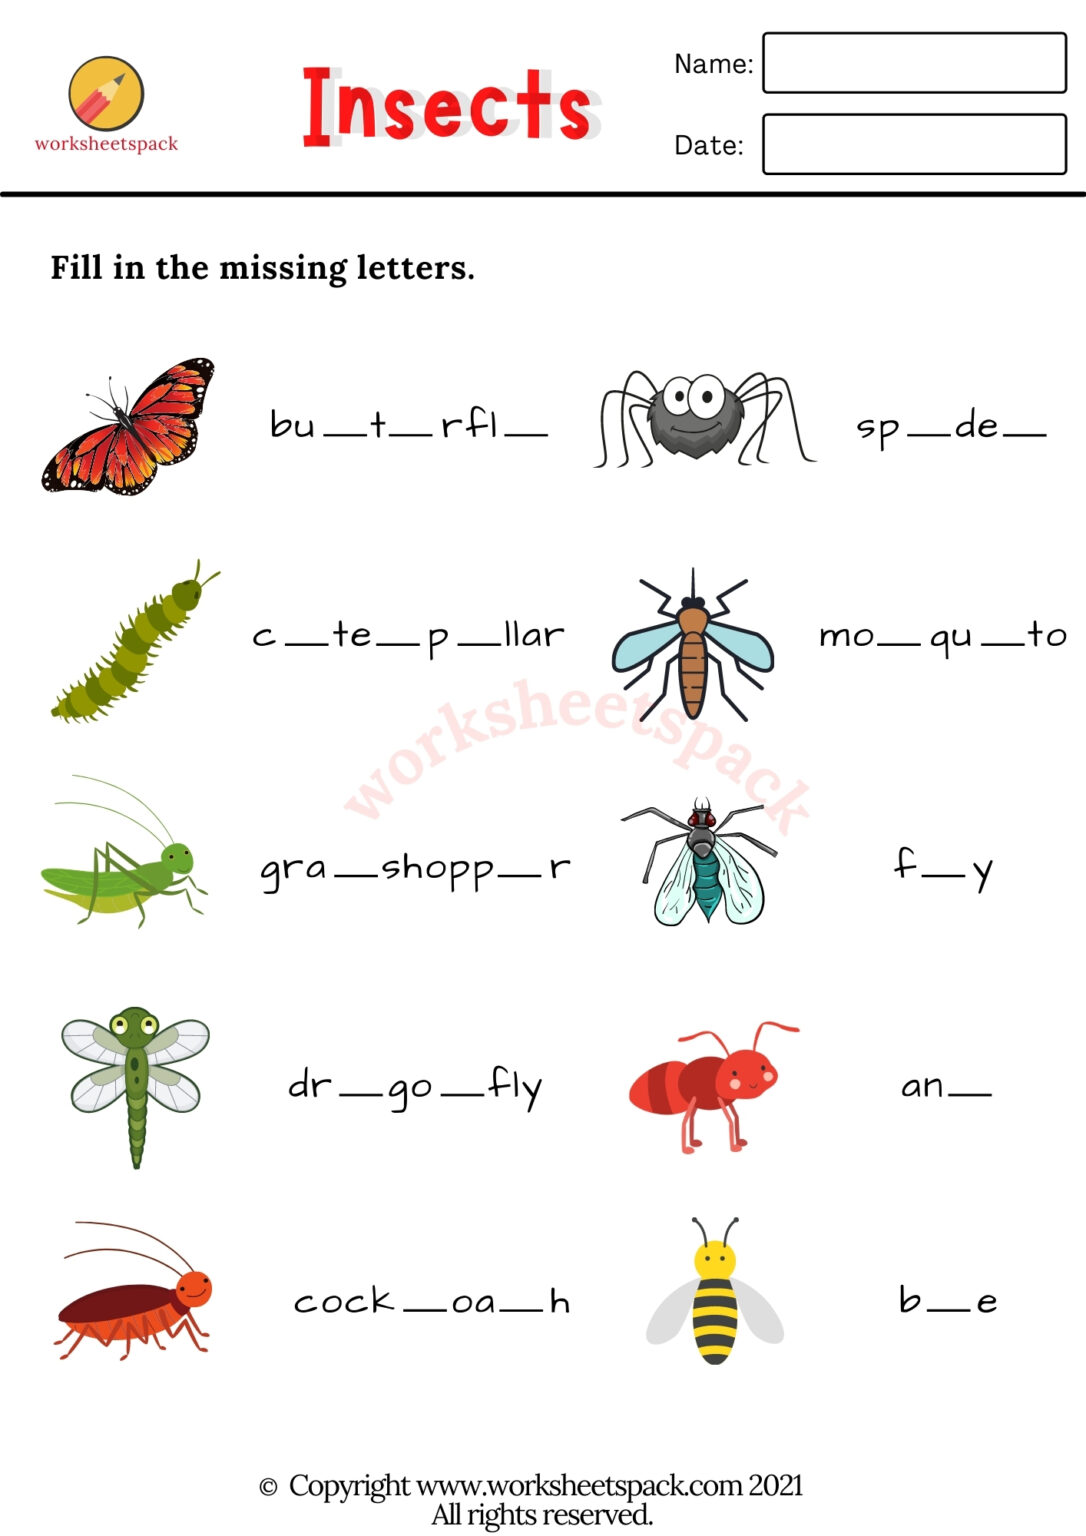 Free Insects Worksheets - worksheetspack